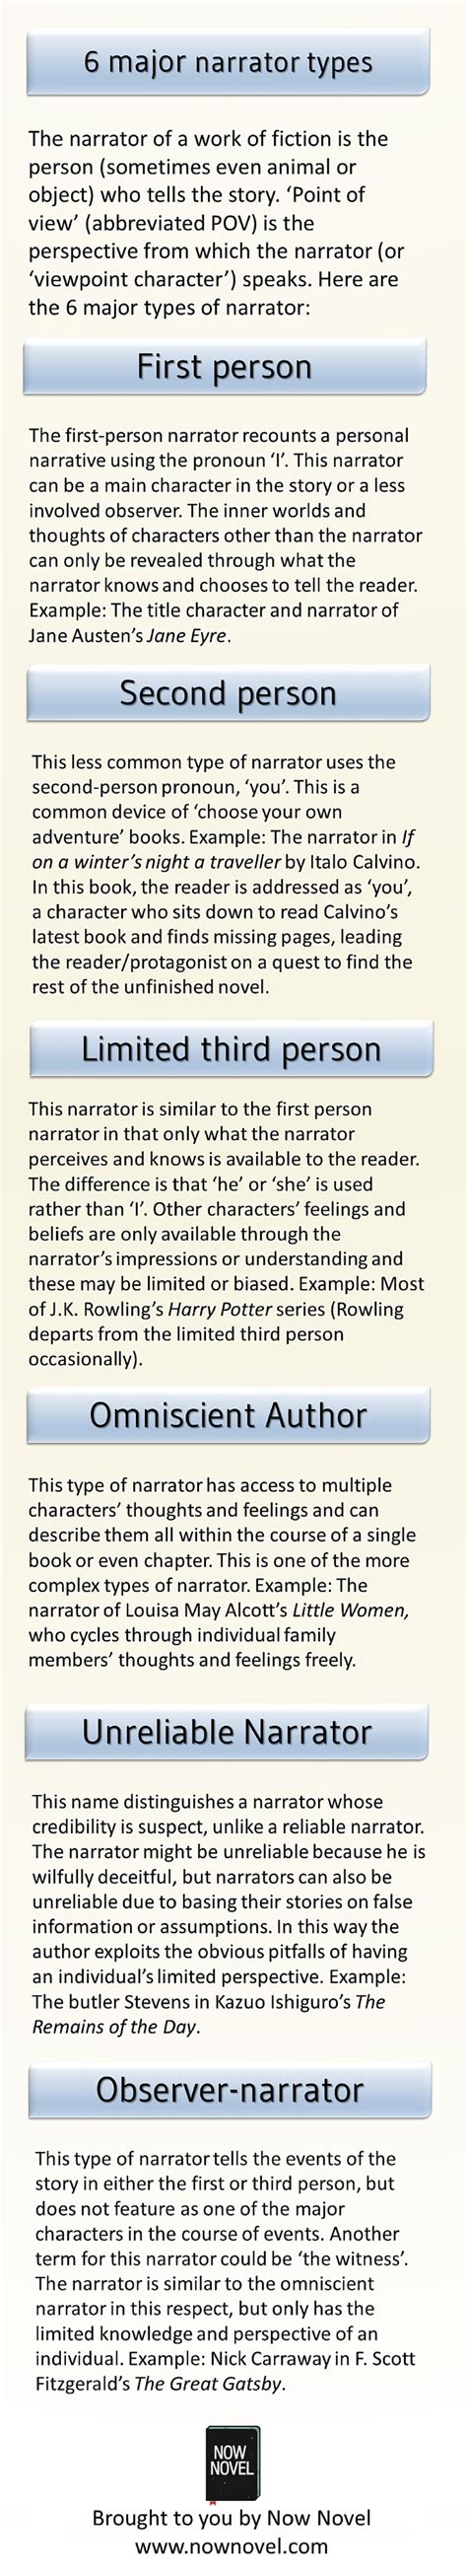 6 Types Of Narration Infographic Now Novel Writing Tips Writing